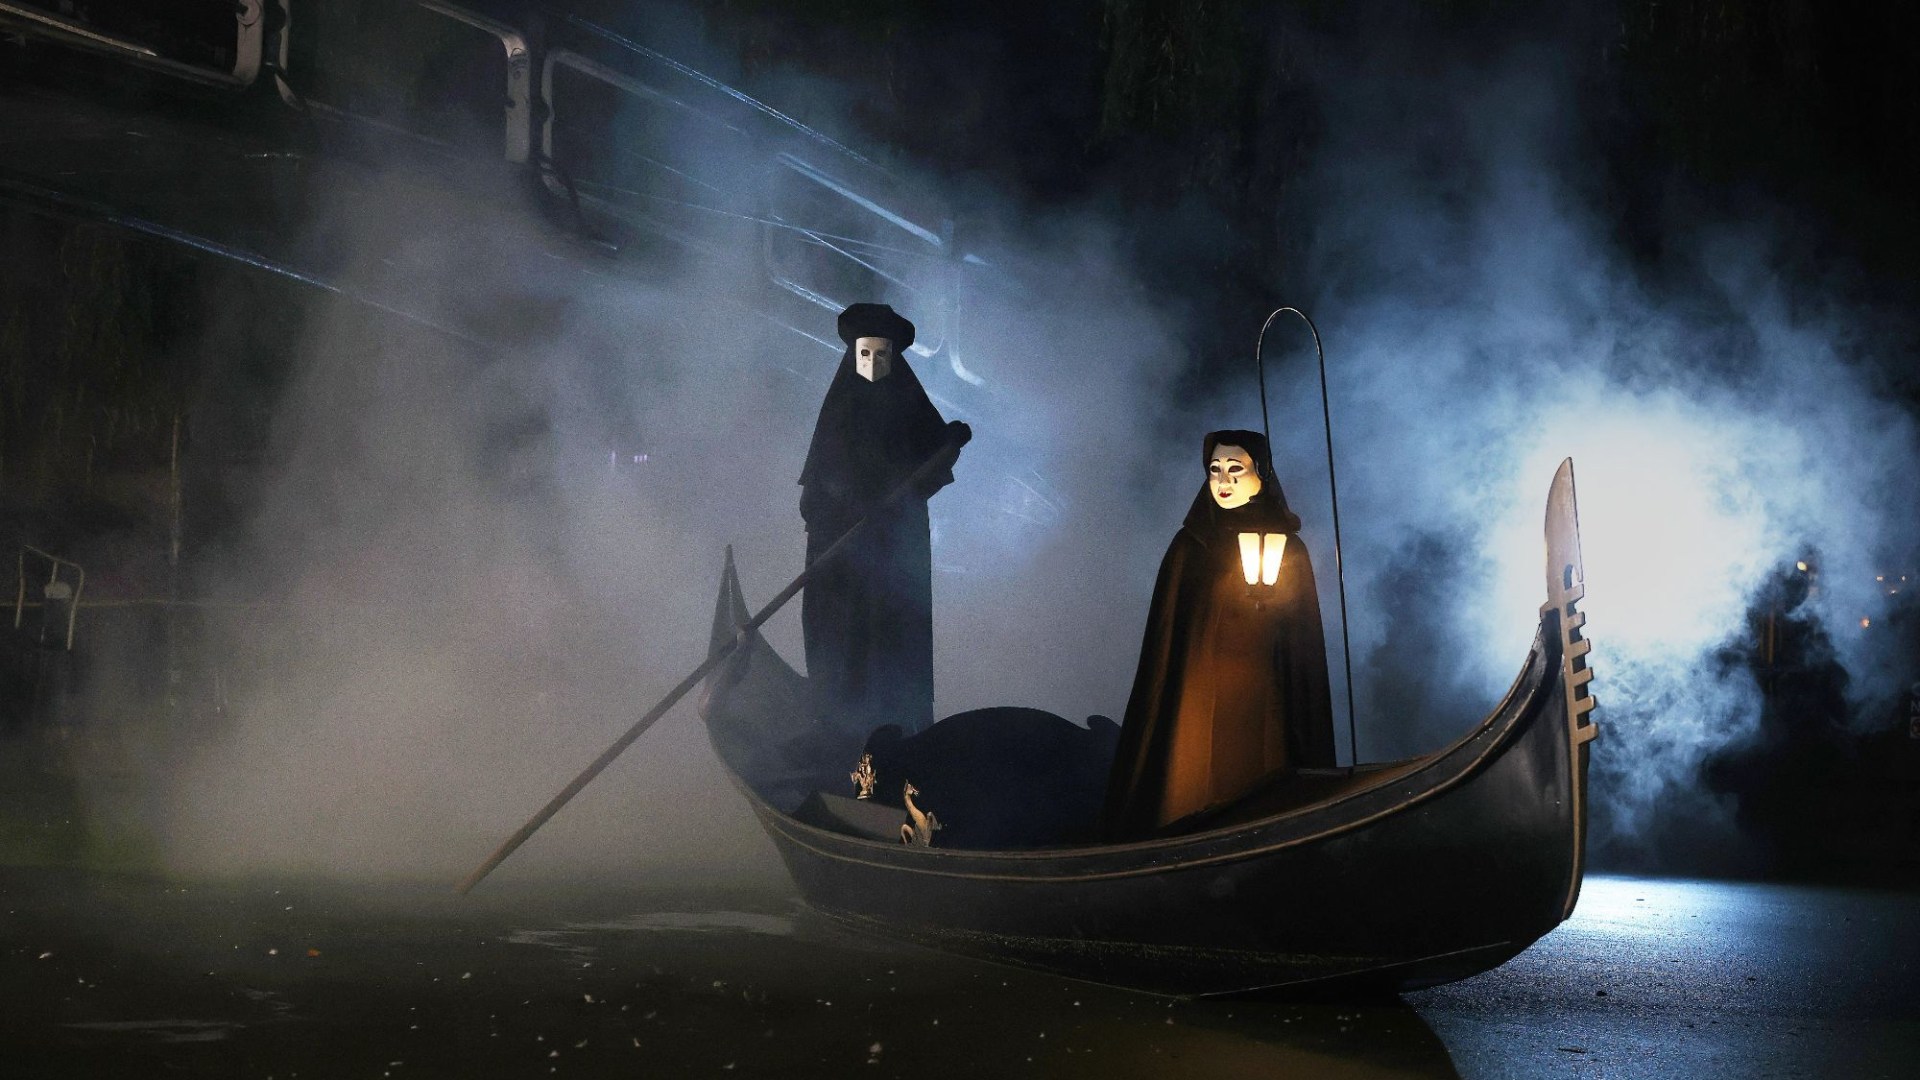 London’s canals transformed into ghost town as ghoulish gondolas glide through Little Venice